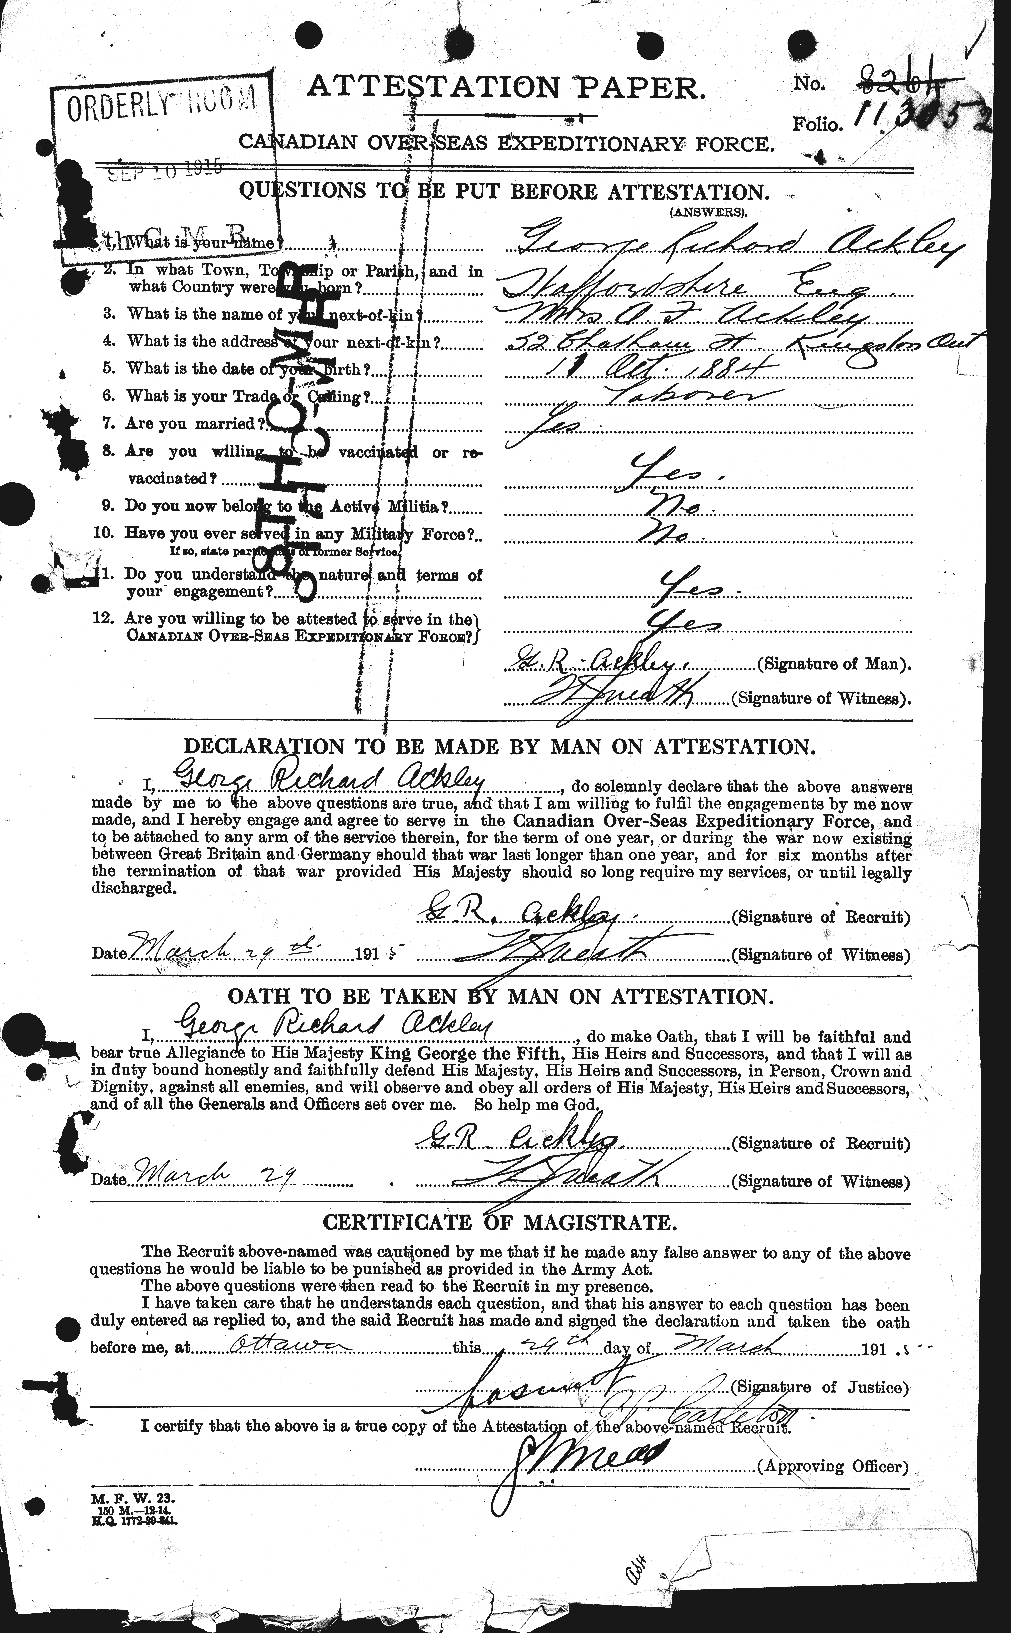 Personnel Records of the First World War - CEF 200698a